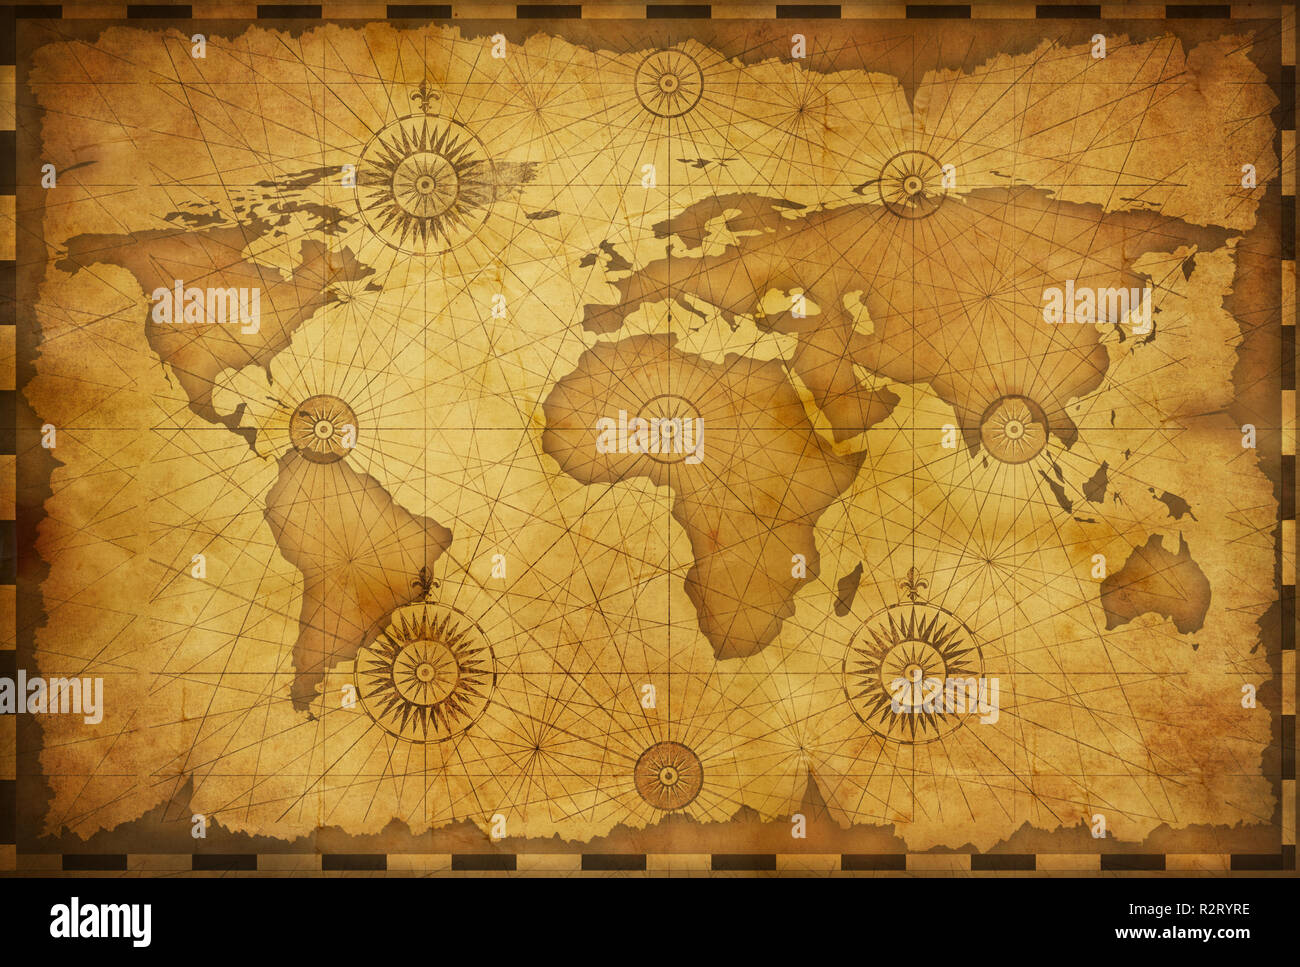 Old world map in vintage style. Elements of this image furnished by NASA. Stock Photo